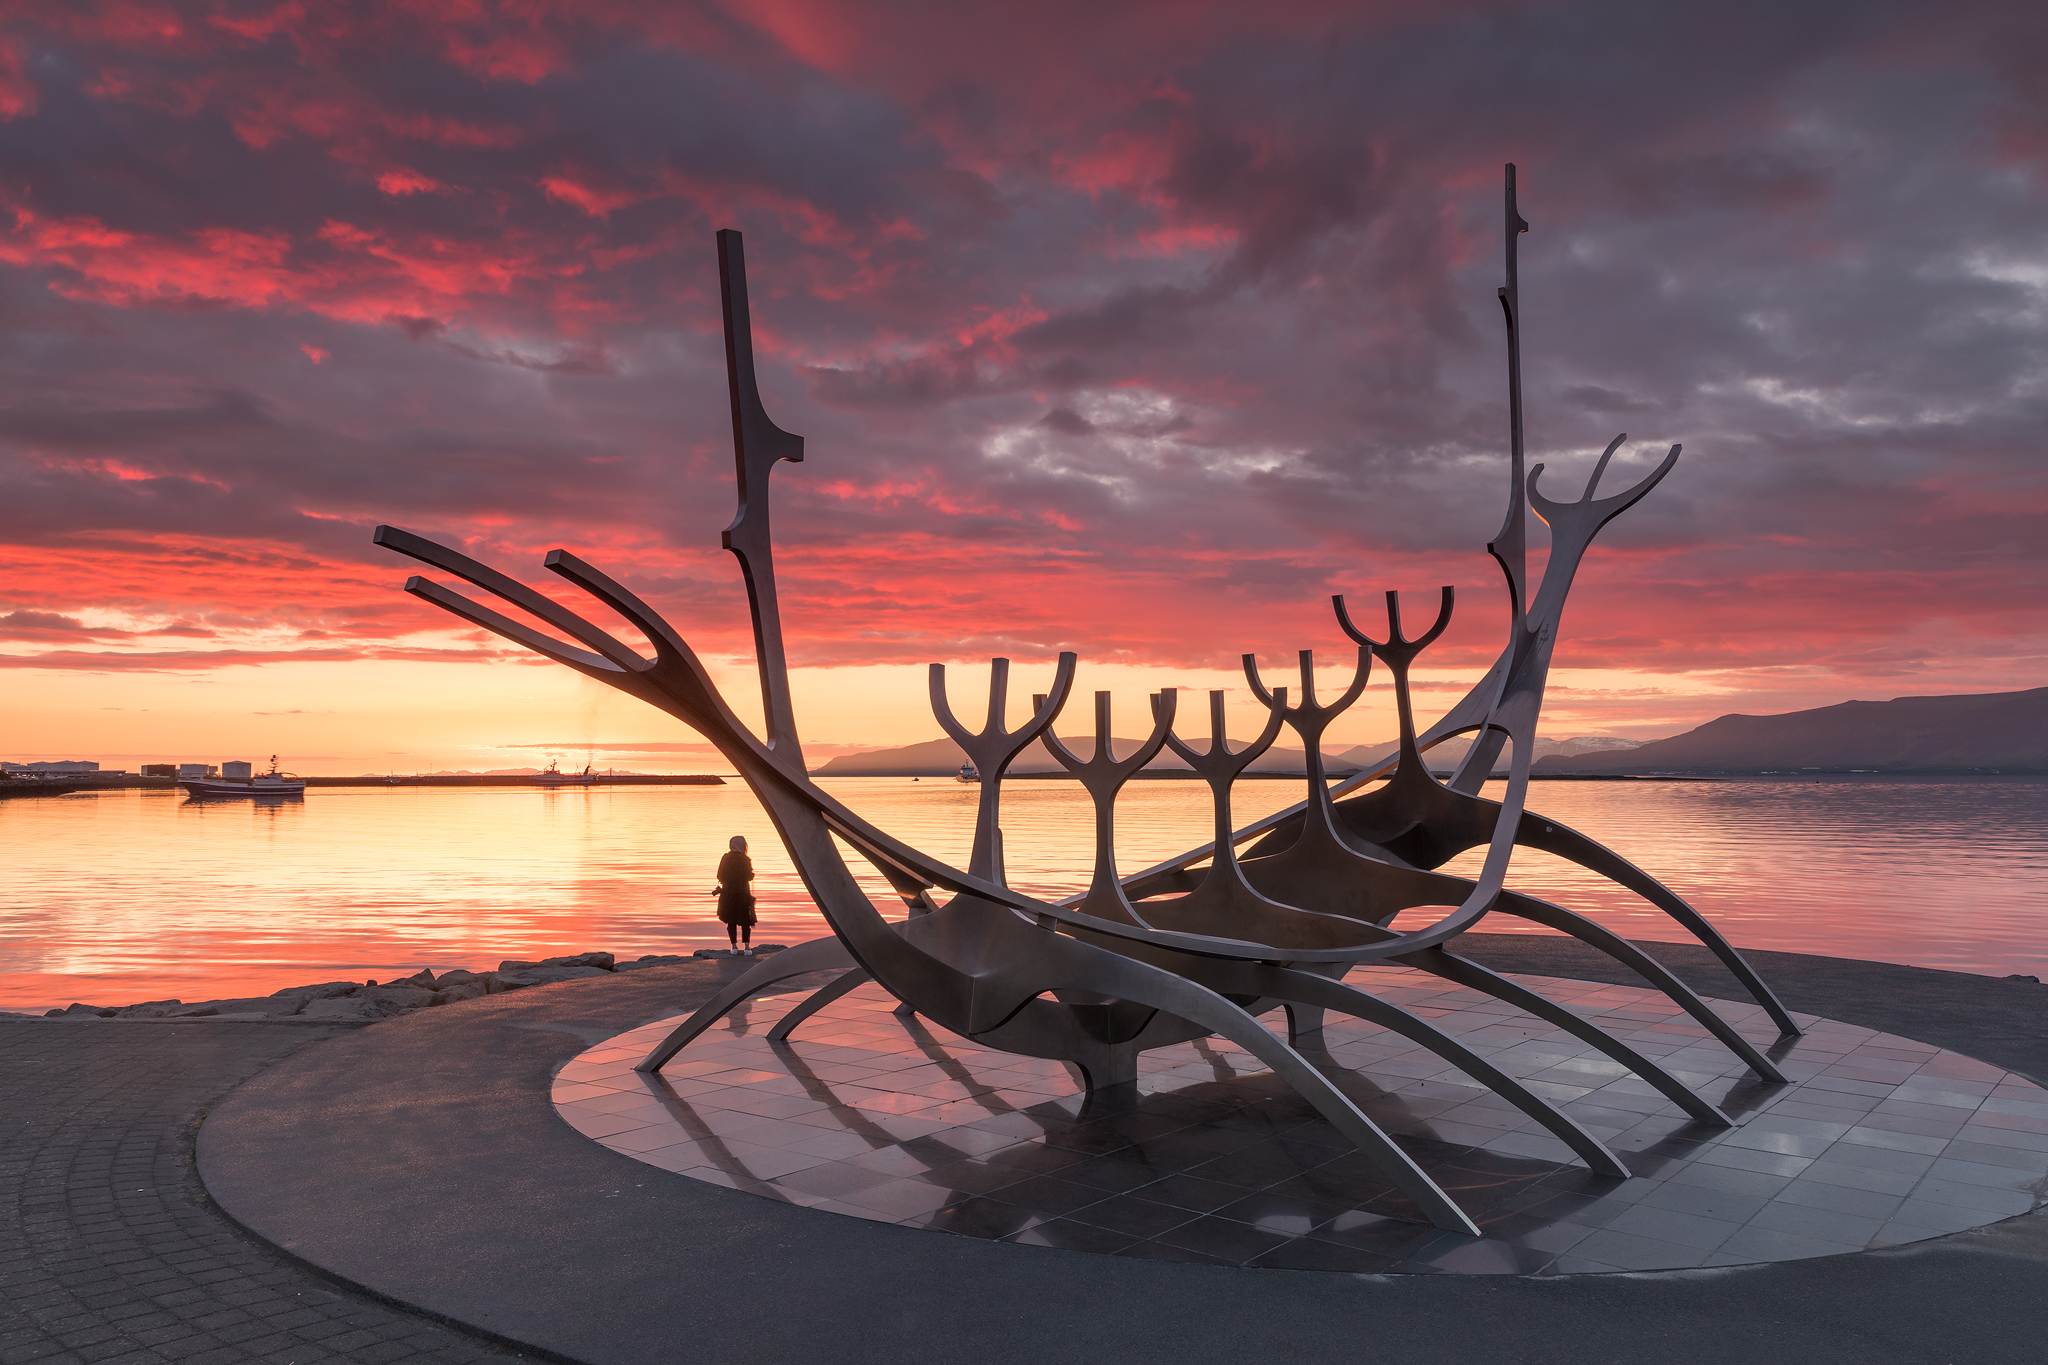 'The Sun Voyager' was officially unveiled on August 18th, 1990.